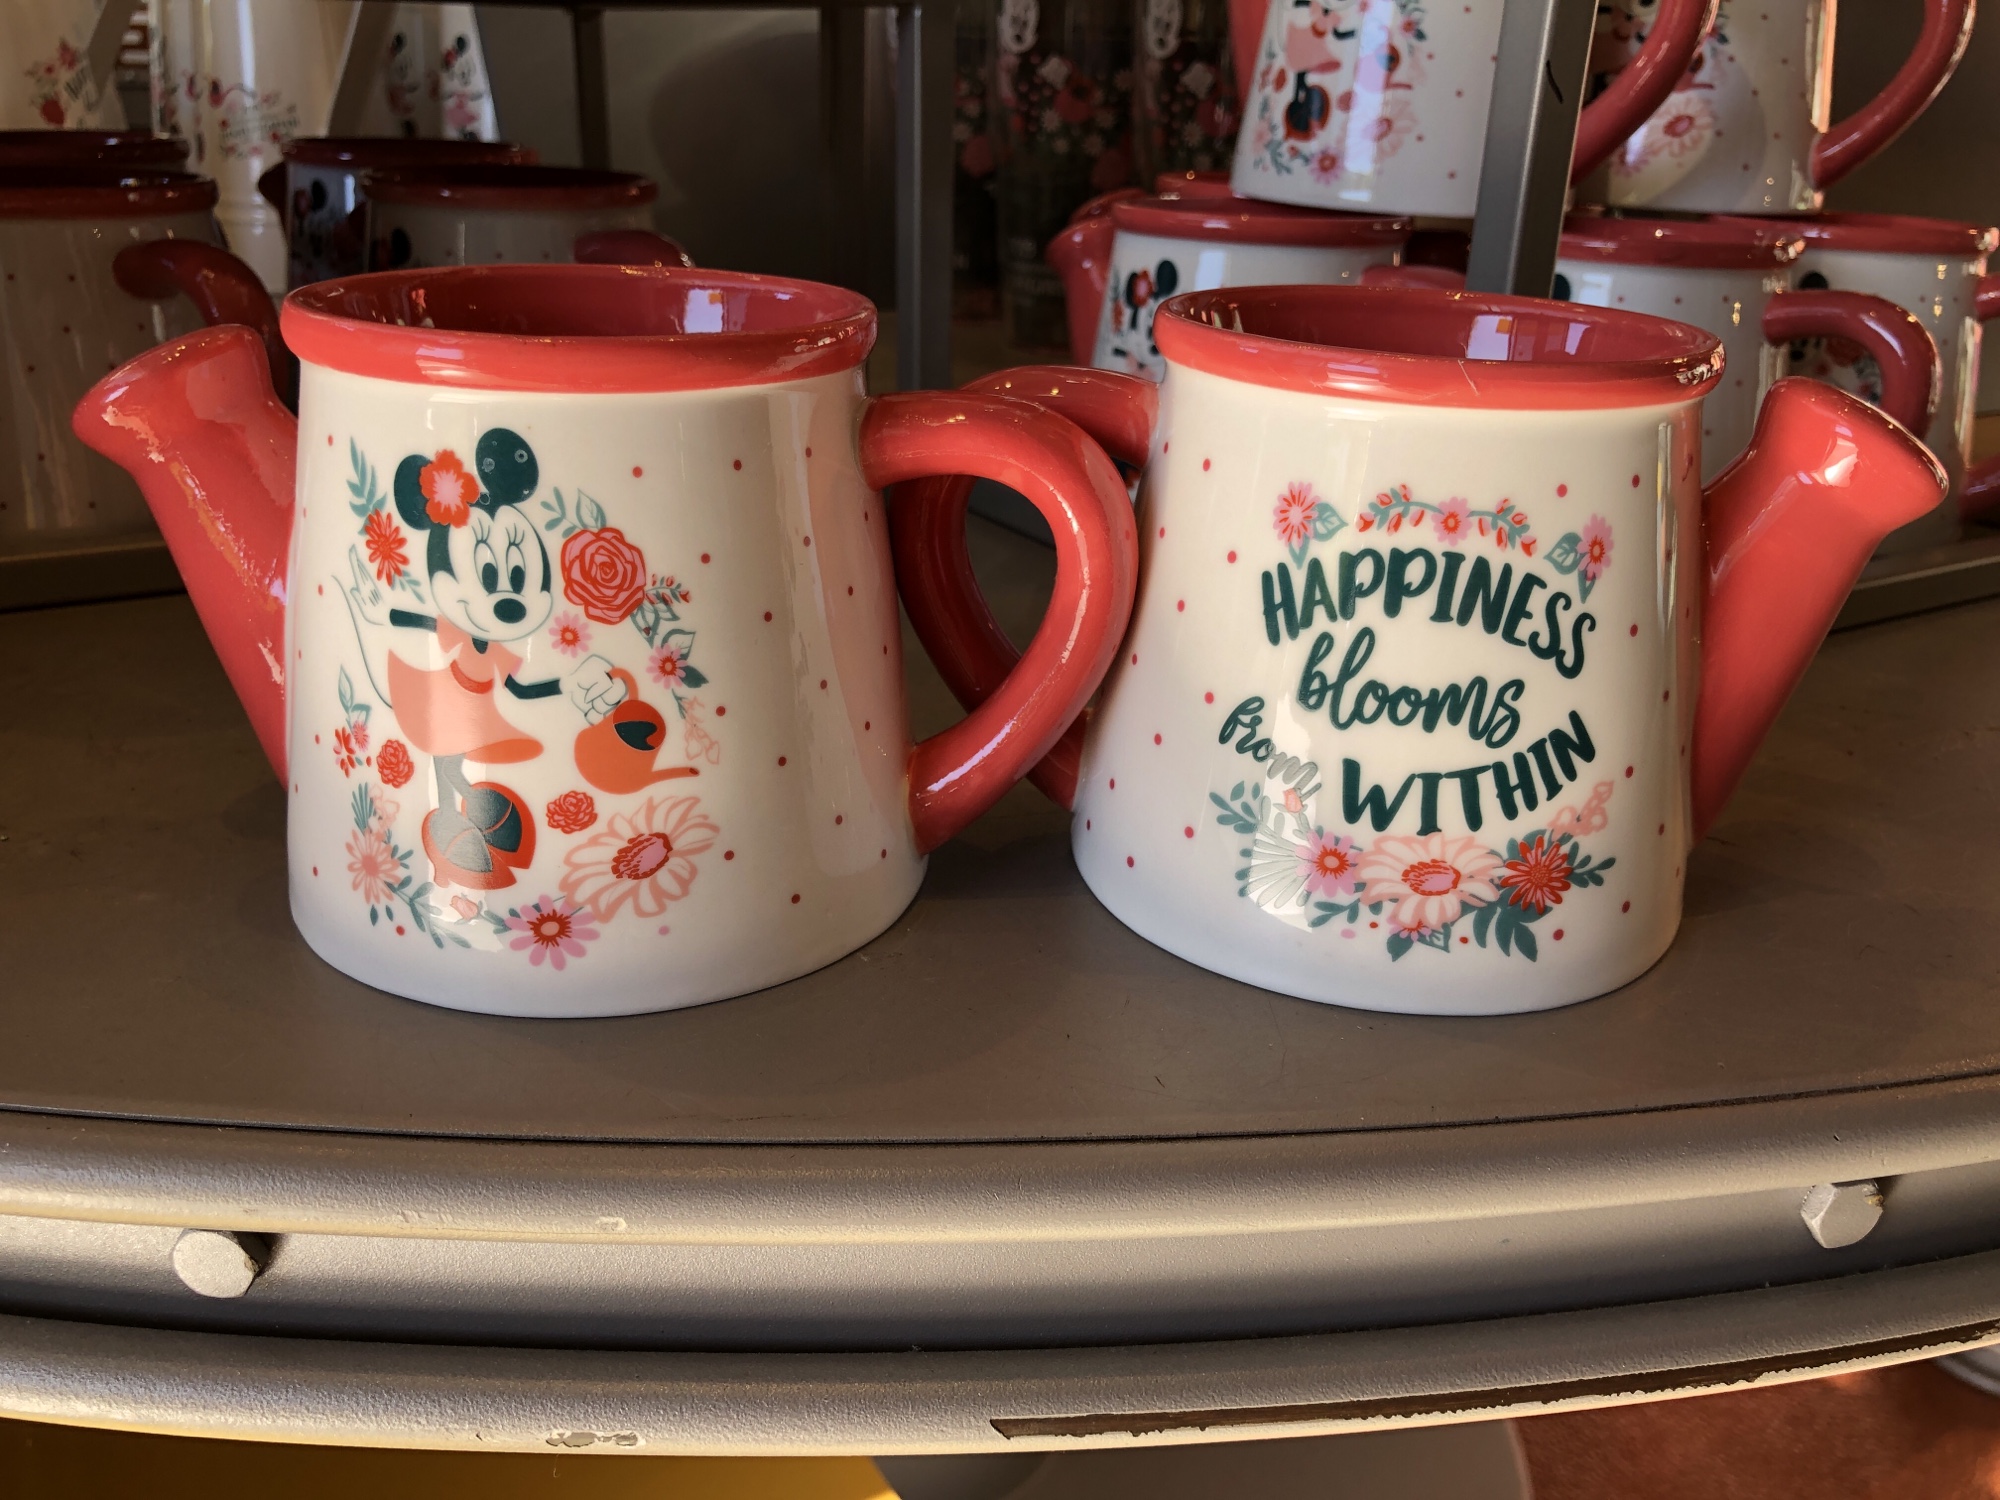 photos: 2019 flower and garden merchandise blooms at epcot - blog mickey